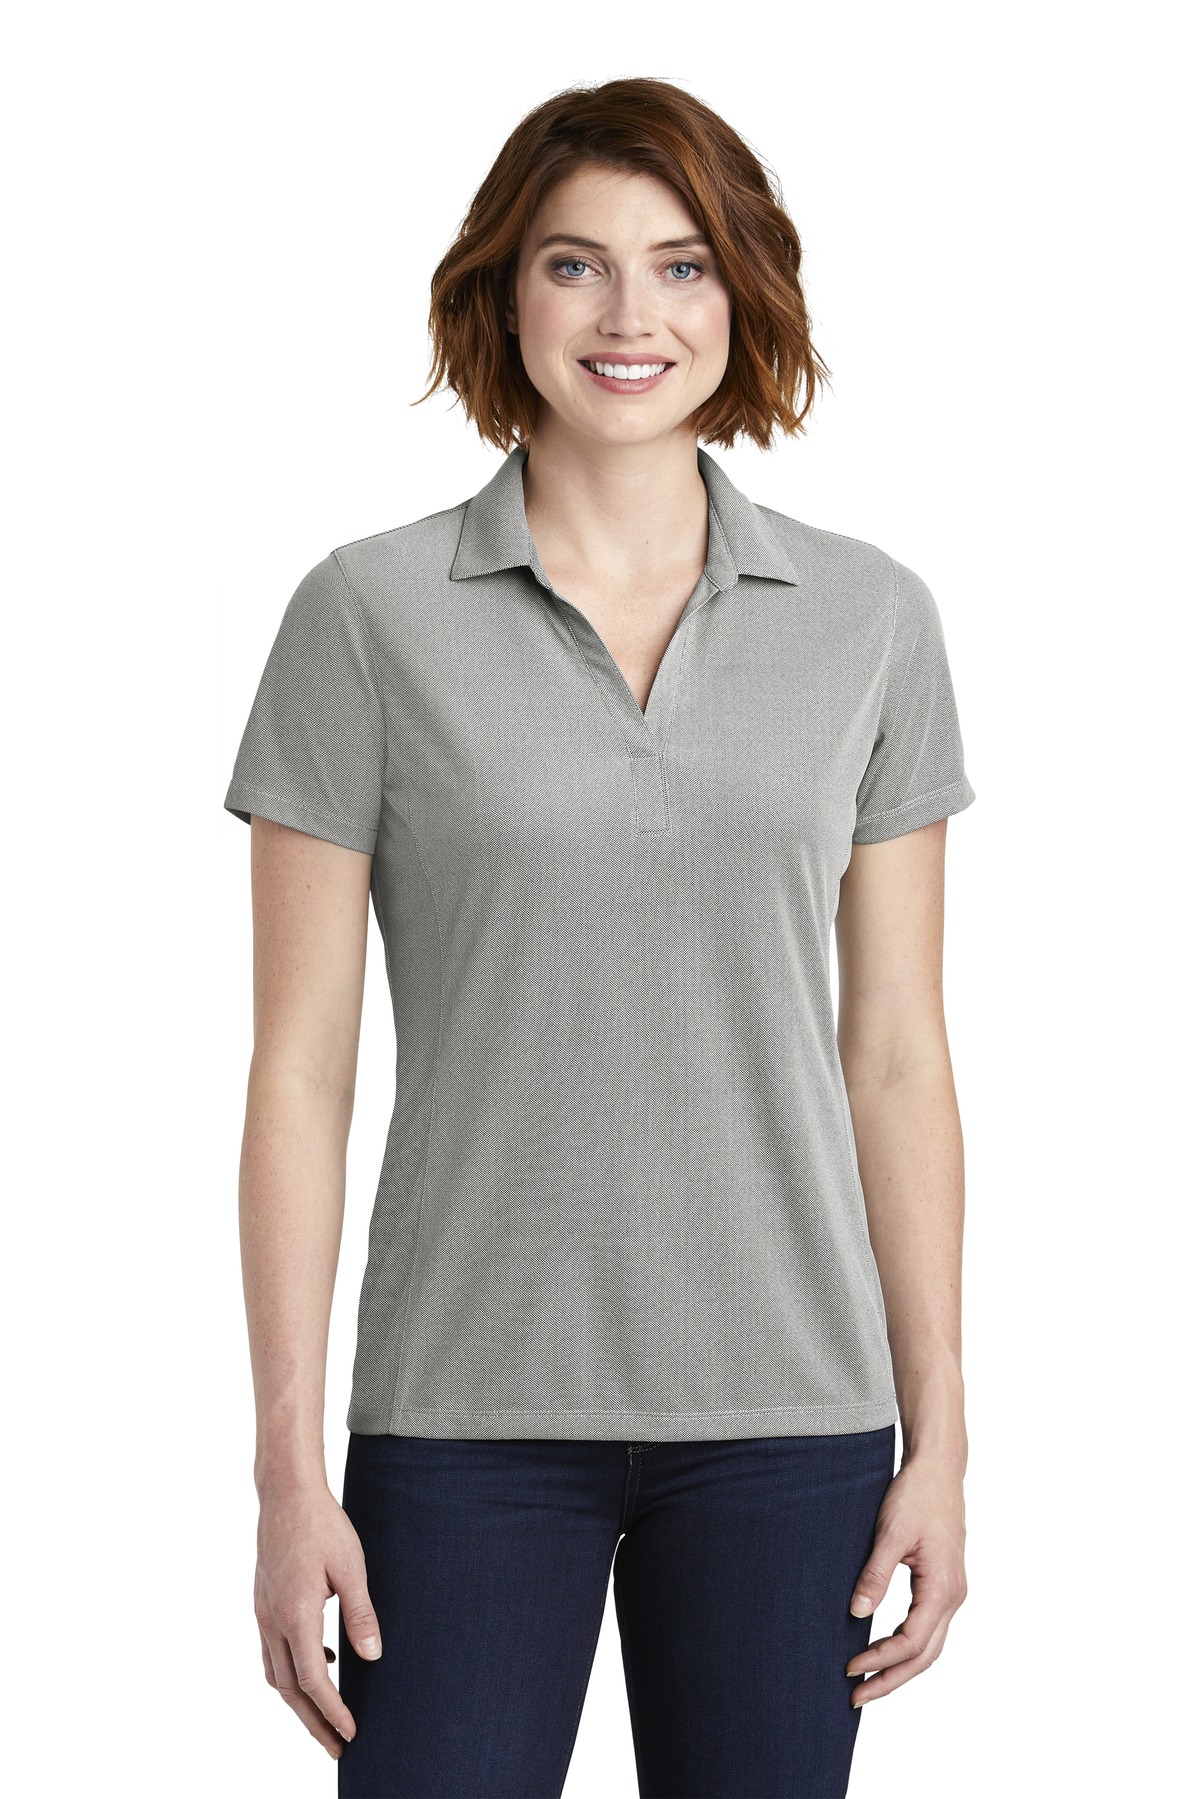 Port Authority Hospitality Polos & Knits ® Ladies Poly Oxford Pique Polo.-Port Authority